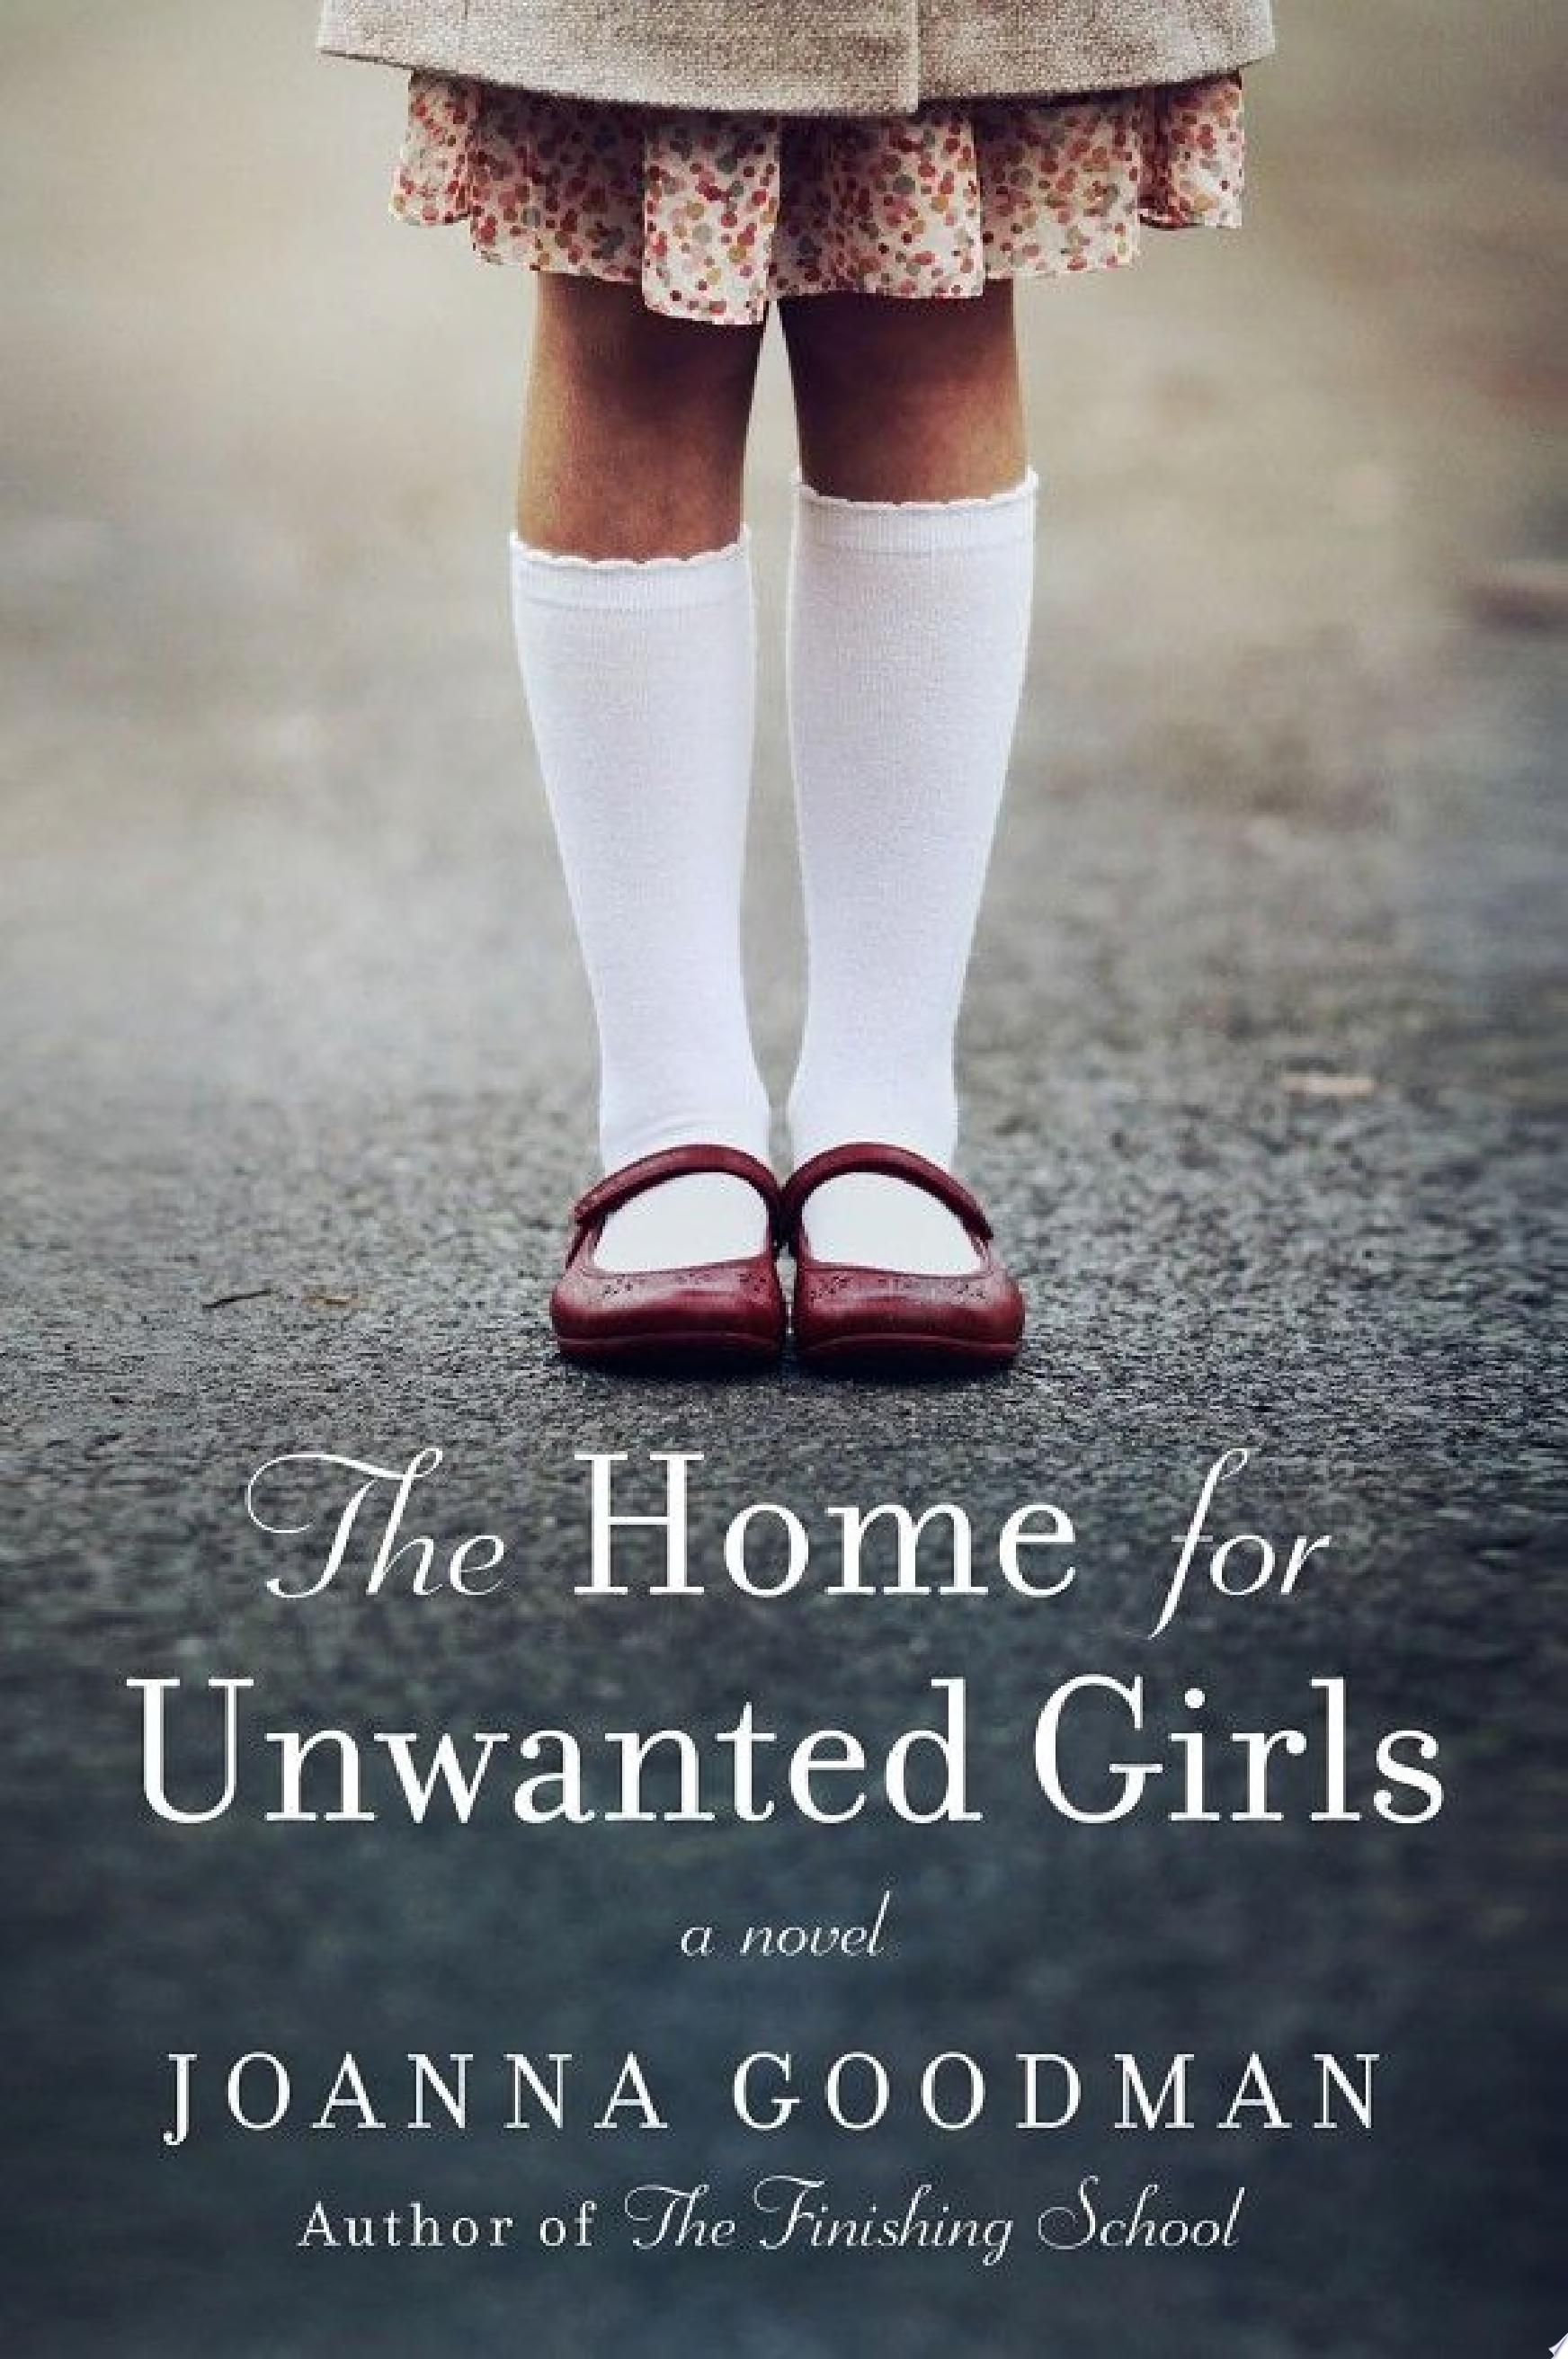 Image for "The Home for Unwanted Girls"